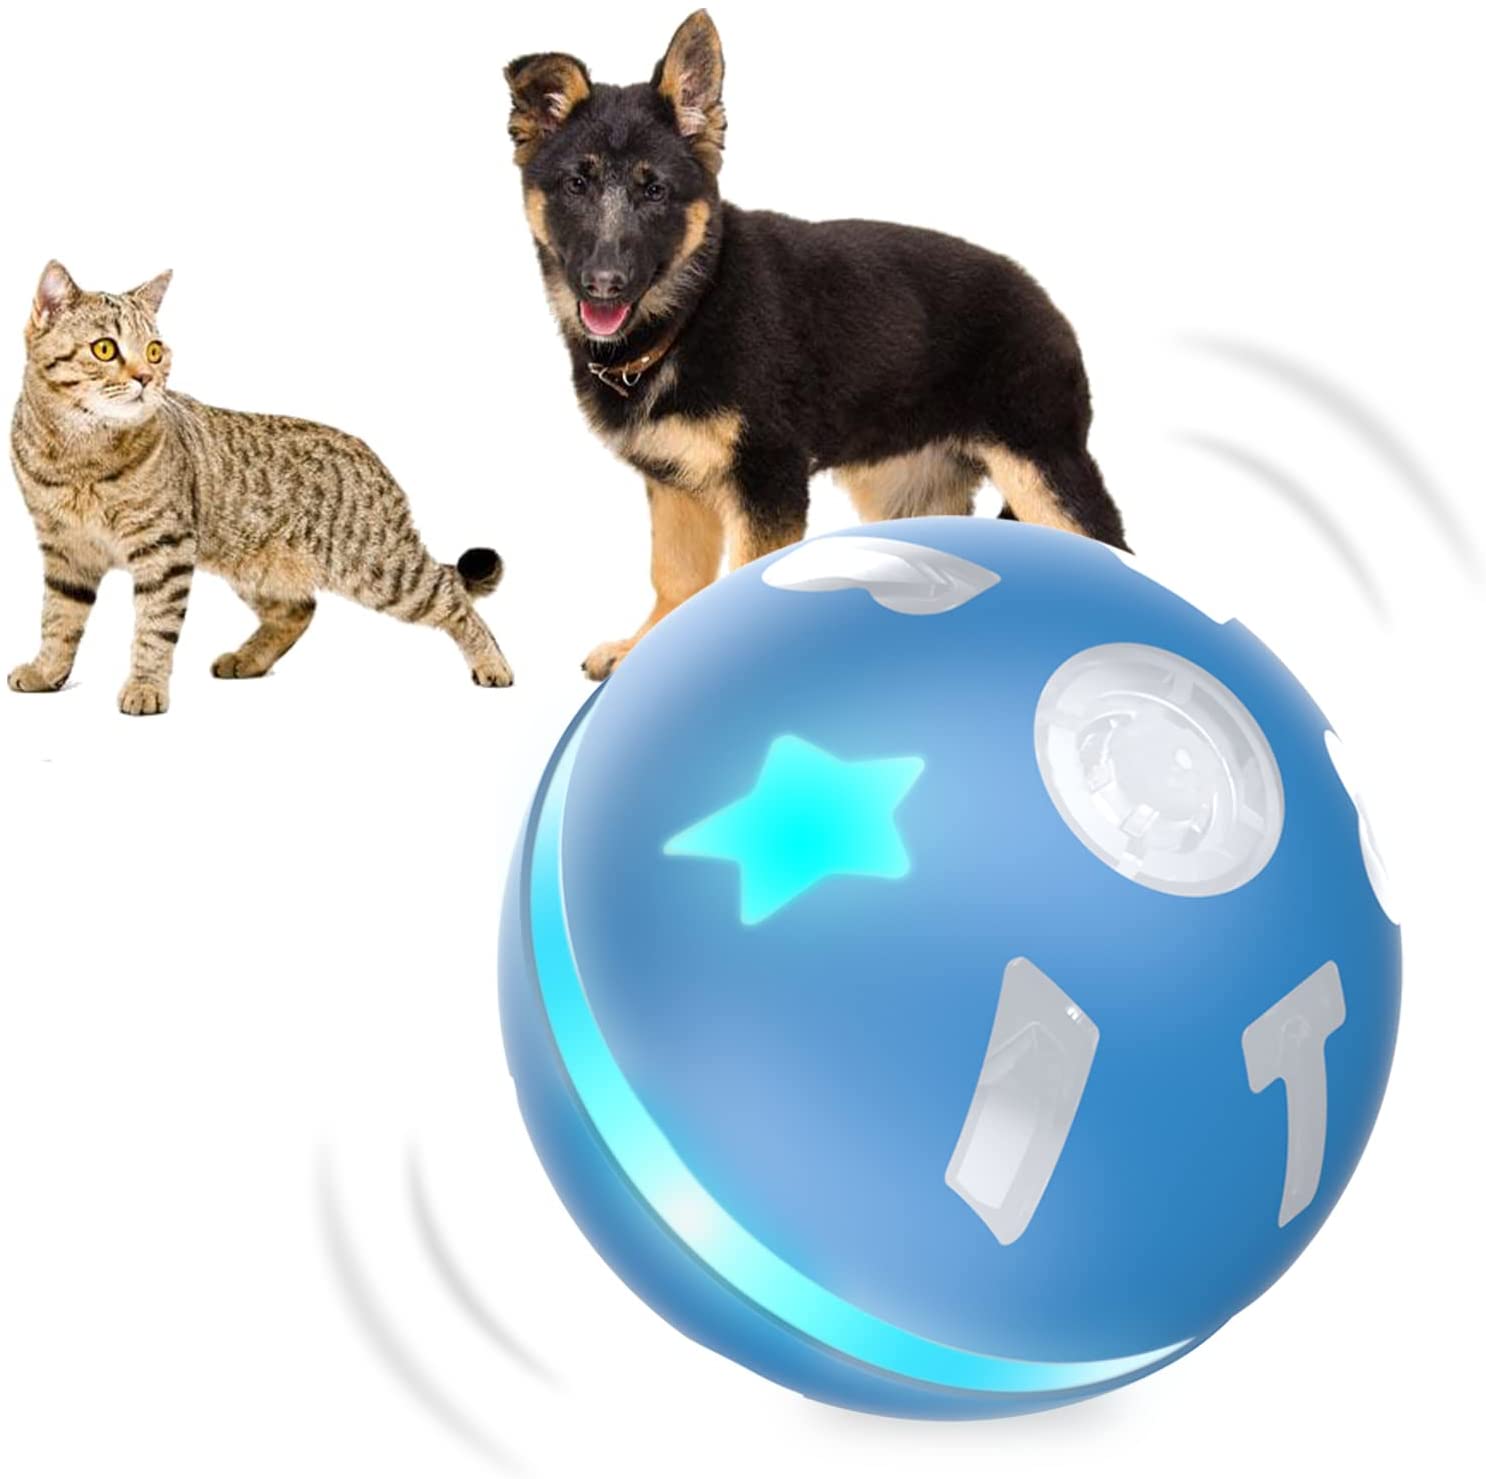 Interactive Dog Toys Dogs/Cats Balls with Motion Activated, Electric Dog Smart Ball for Medium Small Puppy